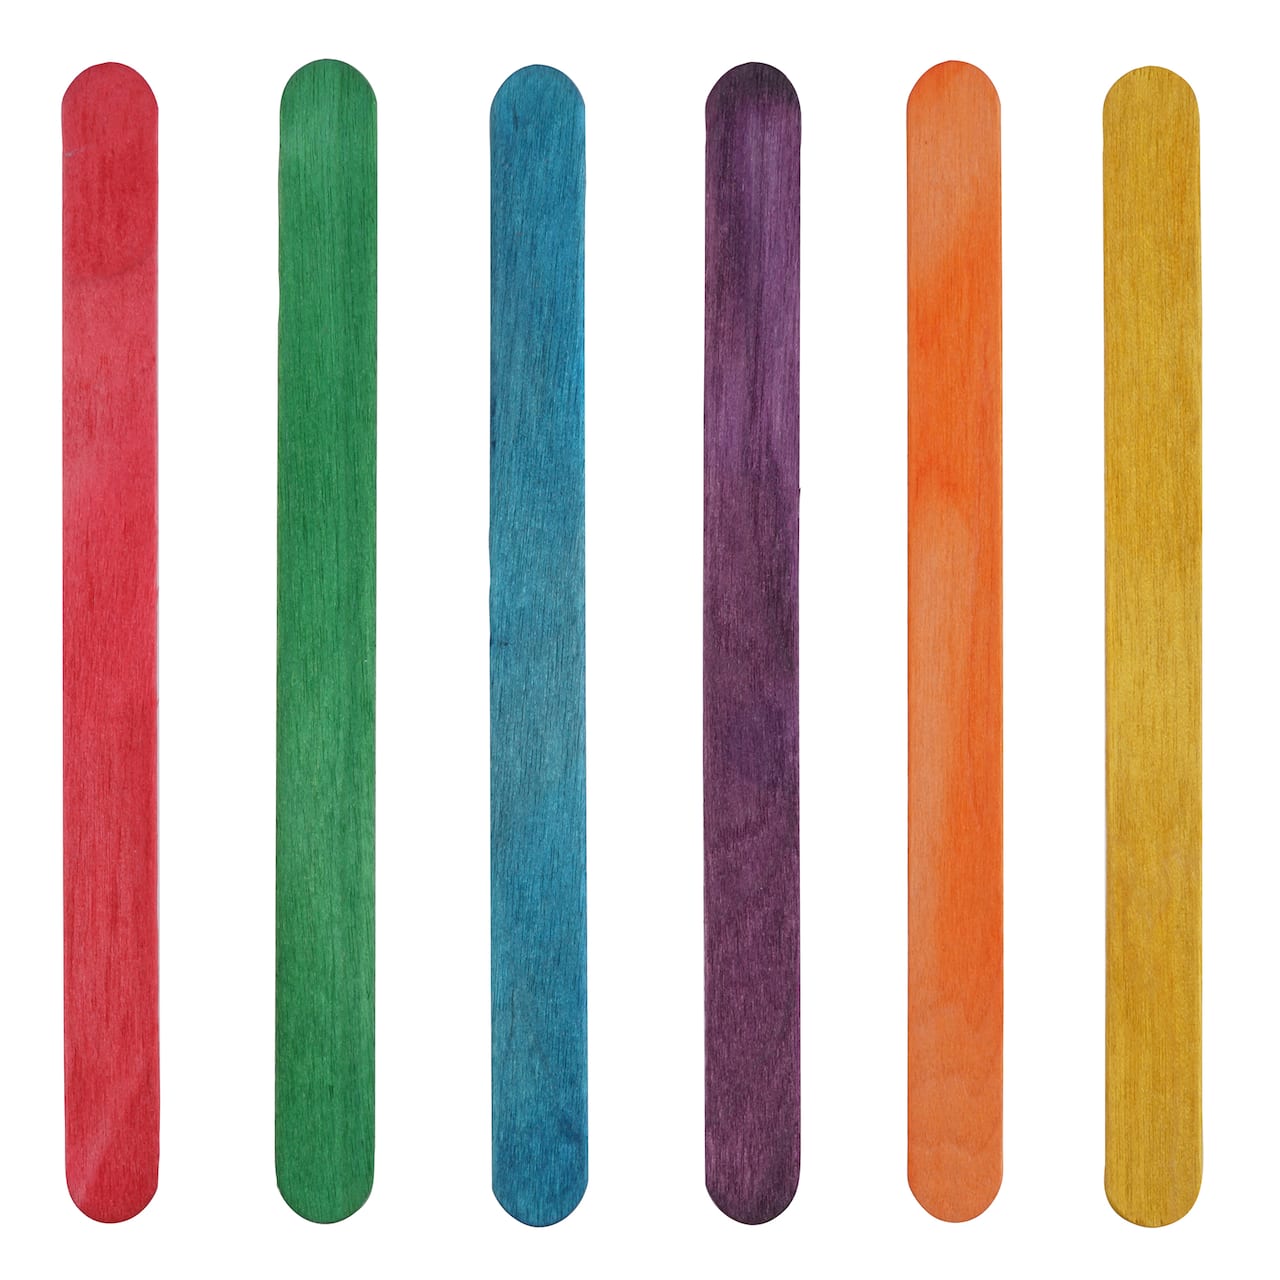 Wood Craft Sticks, Primary Colors by Creatology™